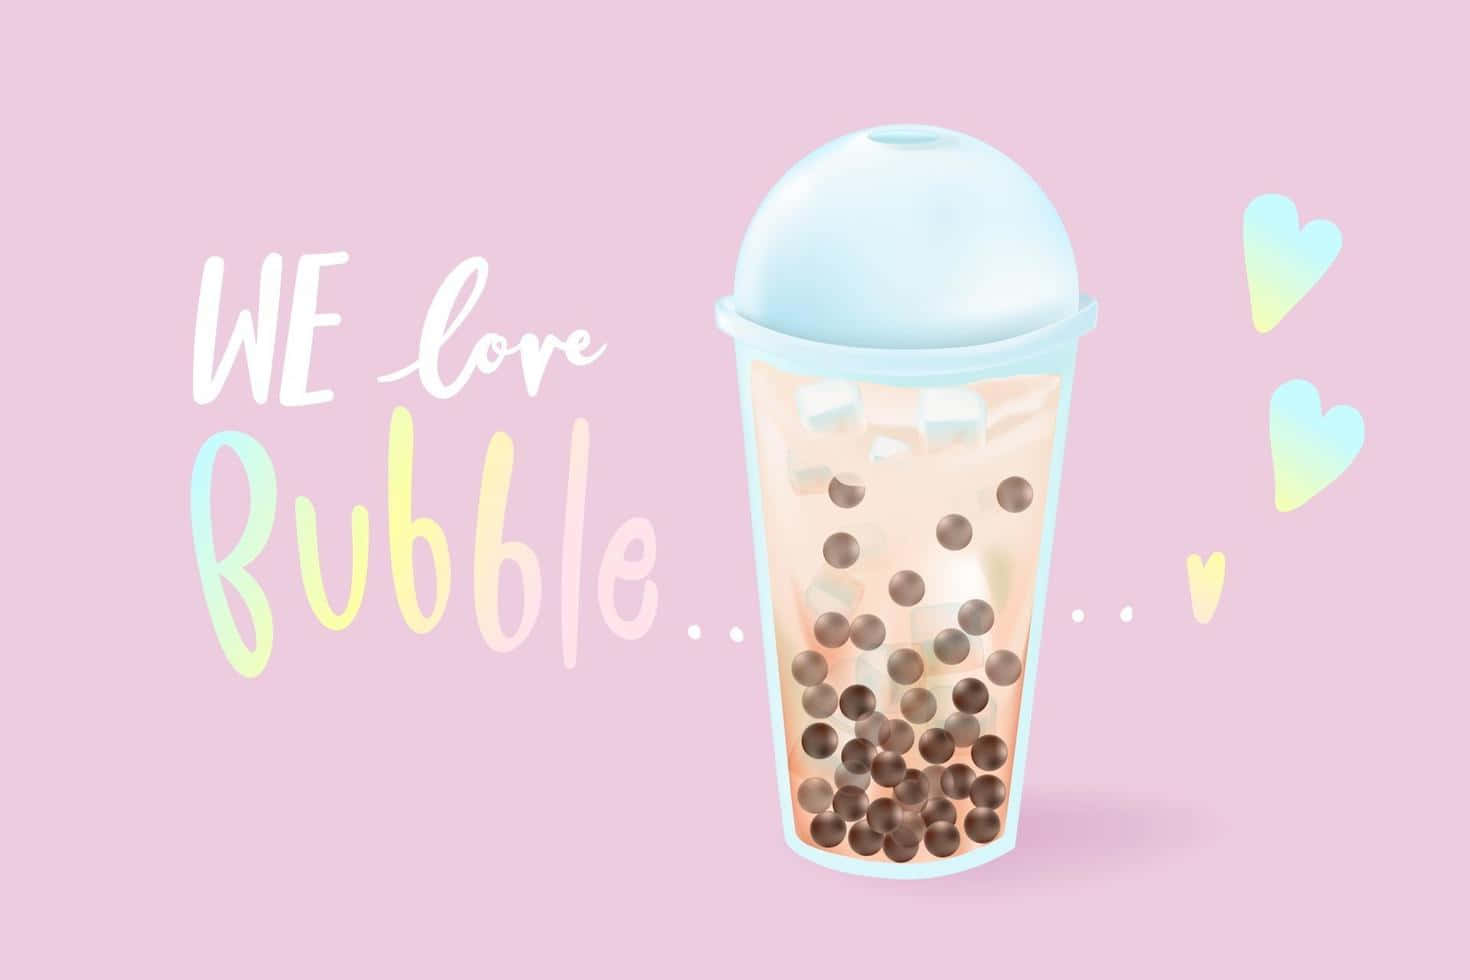 Boba Love Aesthetic Pink Background Wallpaper